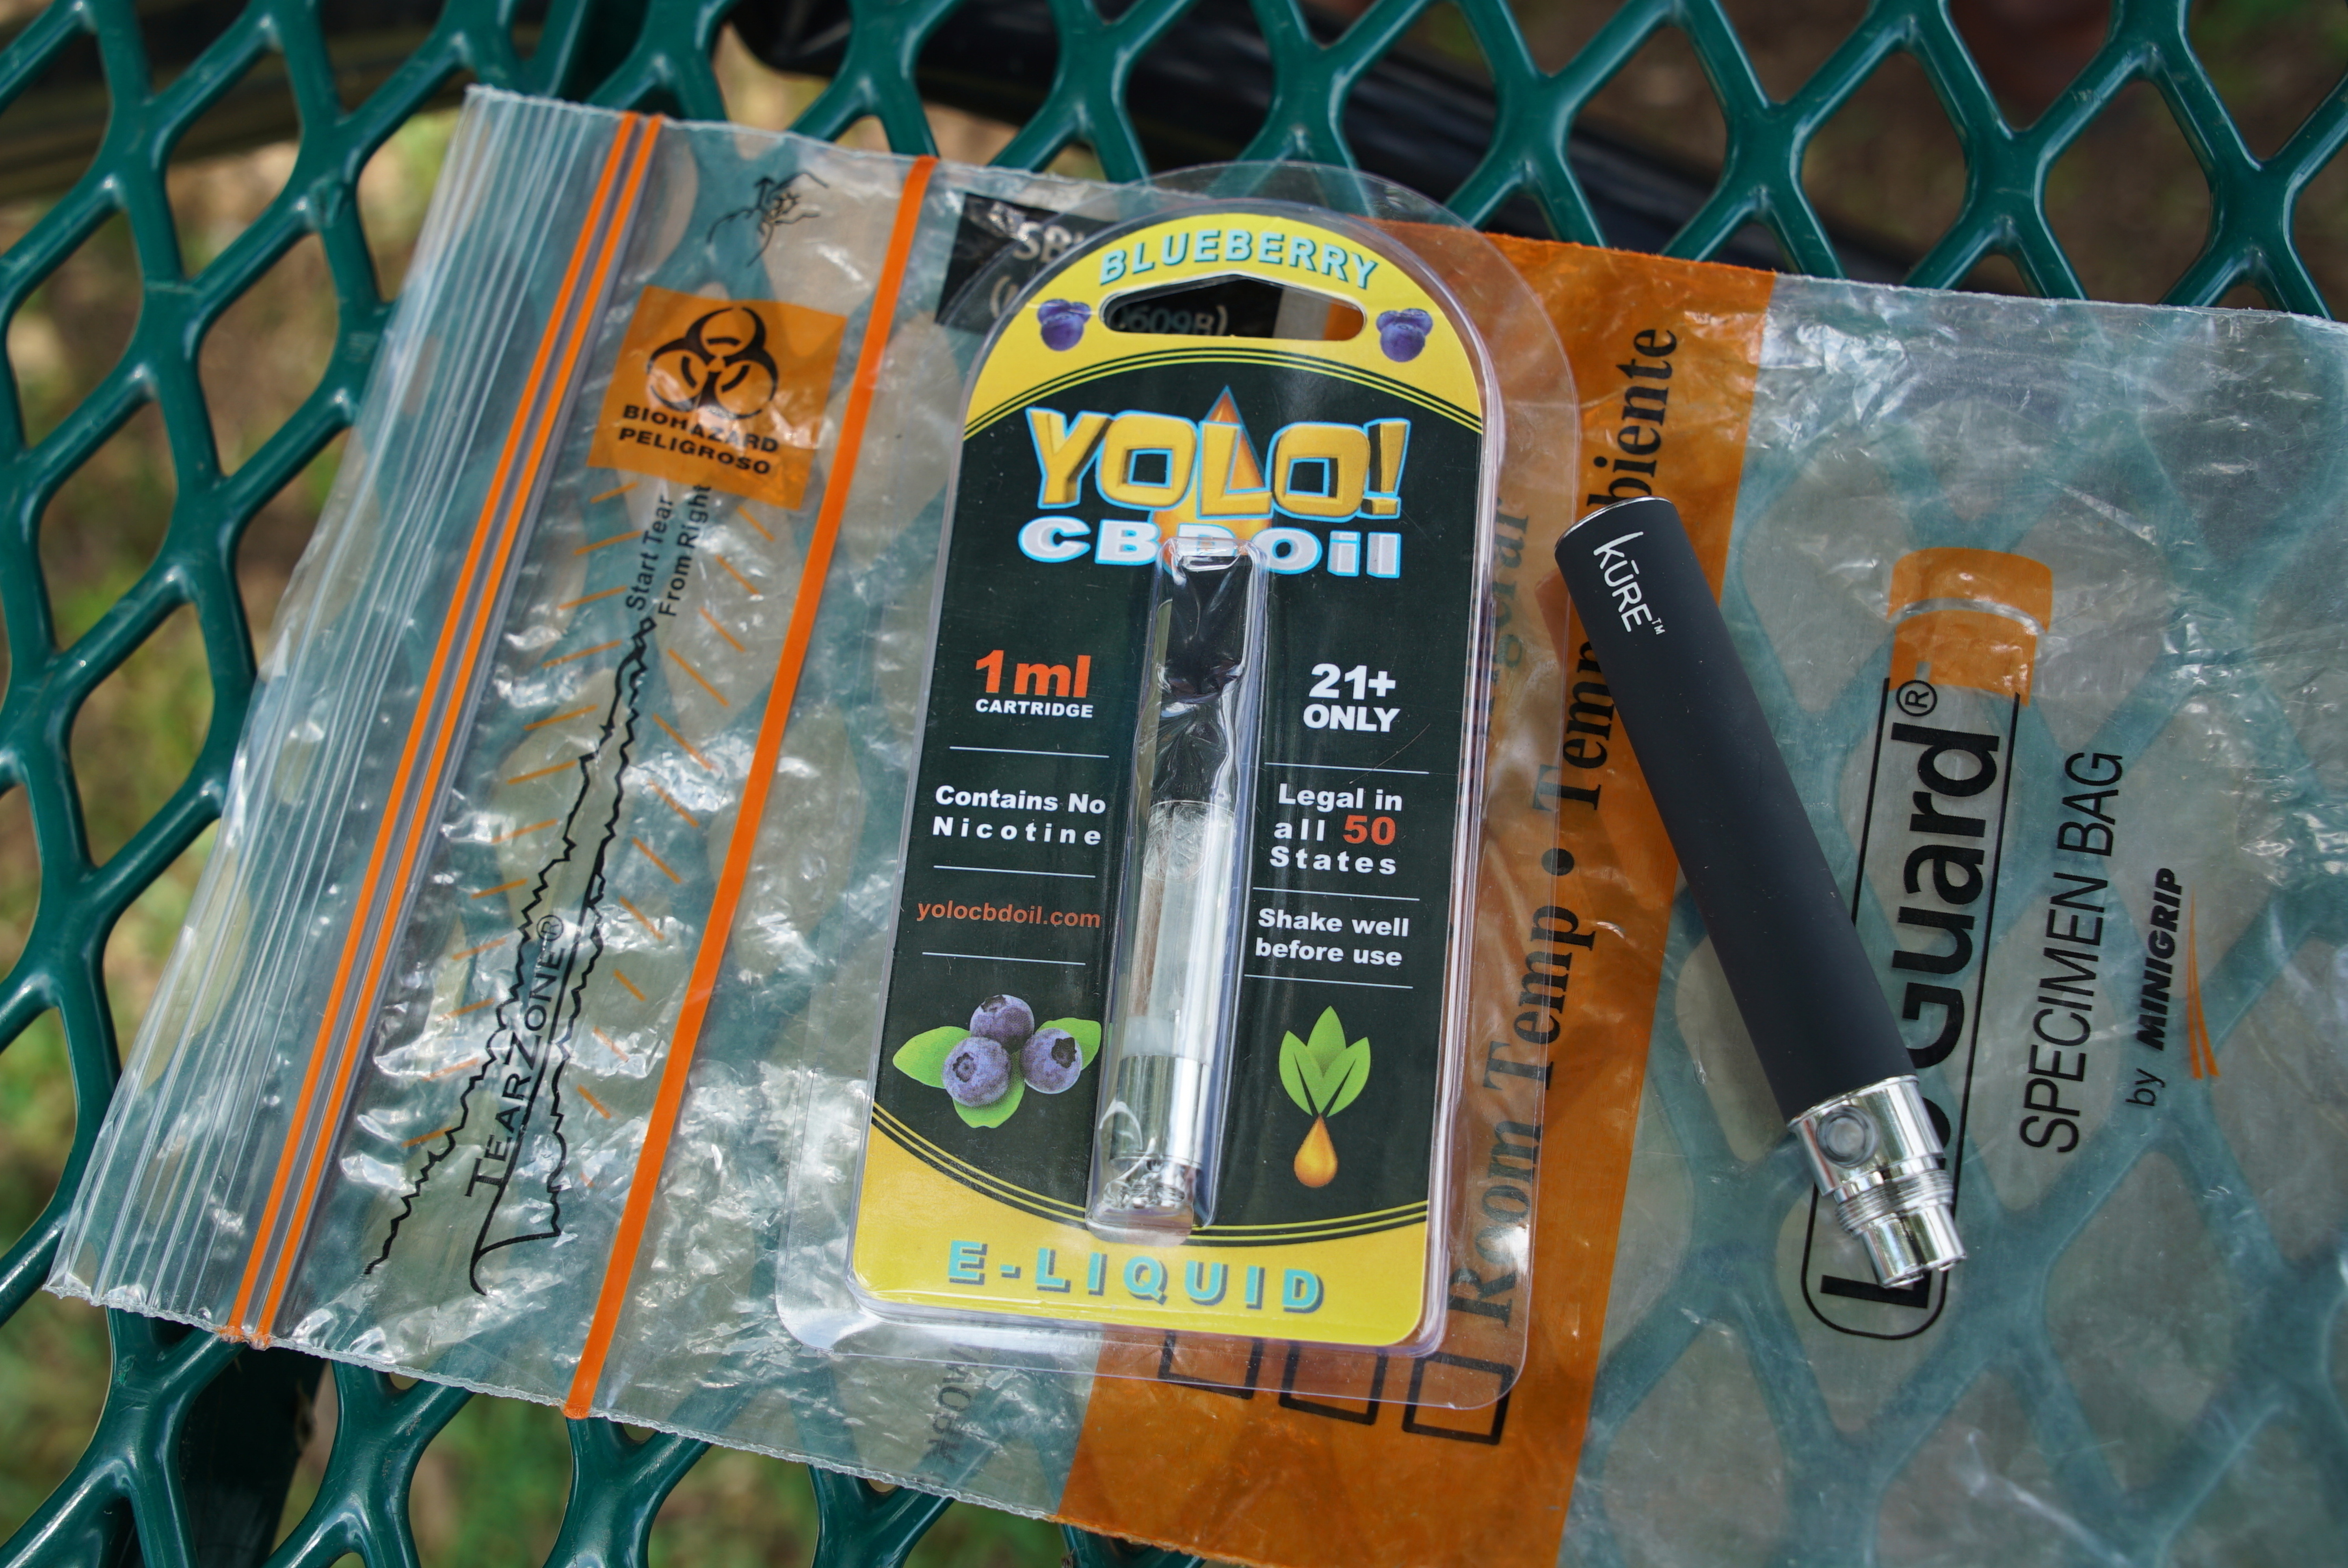 A Yolo! brand CBD oil vape cartridge sits alongside a vape pen on a biohazard bag on a table at a park in Ninety Six, S.C. More than 50 people around Salt Lake City had been poisoned by the time the outbreak ended early last year, most by a vape called Yolo!, the acronym for "you only live once." (AP Photo/Allen G. Breed, File)